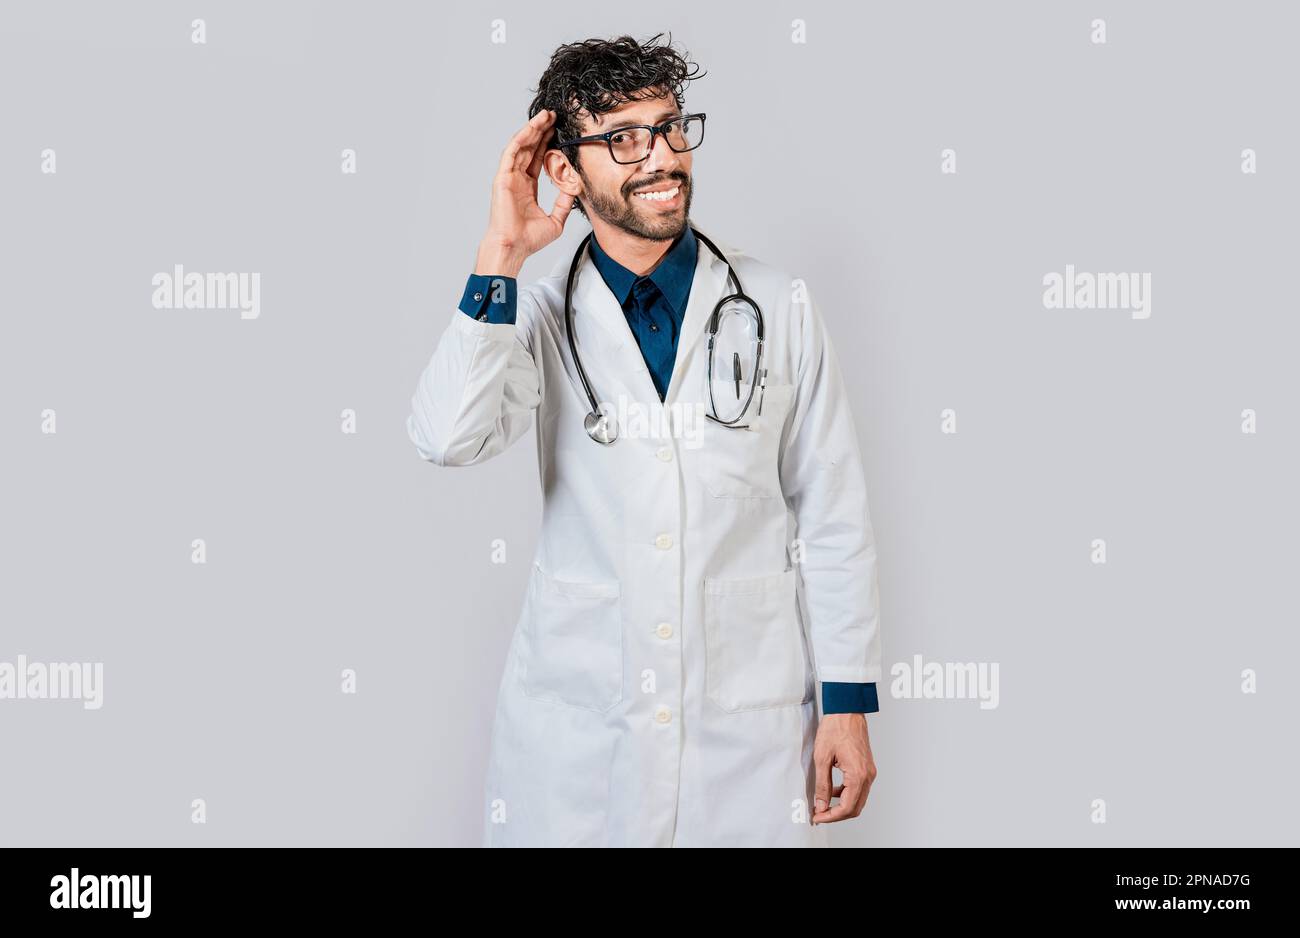 Smiling doctor listening to a rumor. Young doctor smiling with hand over ear isolated, Smiling doctor extending hand isolated Stock Photo